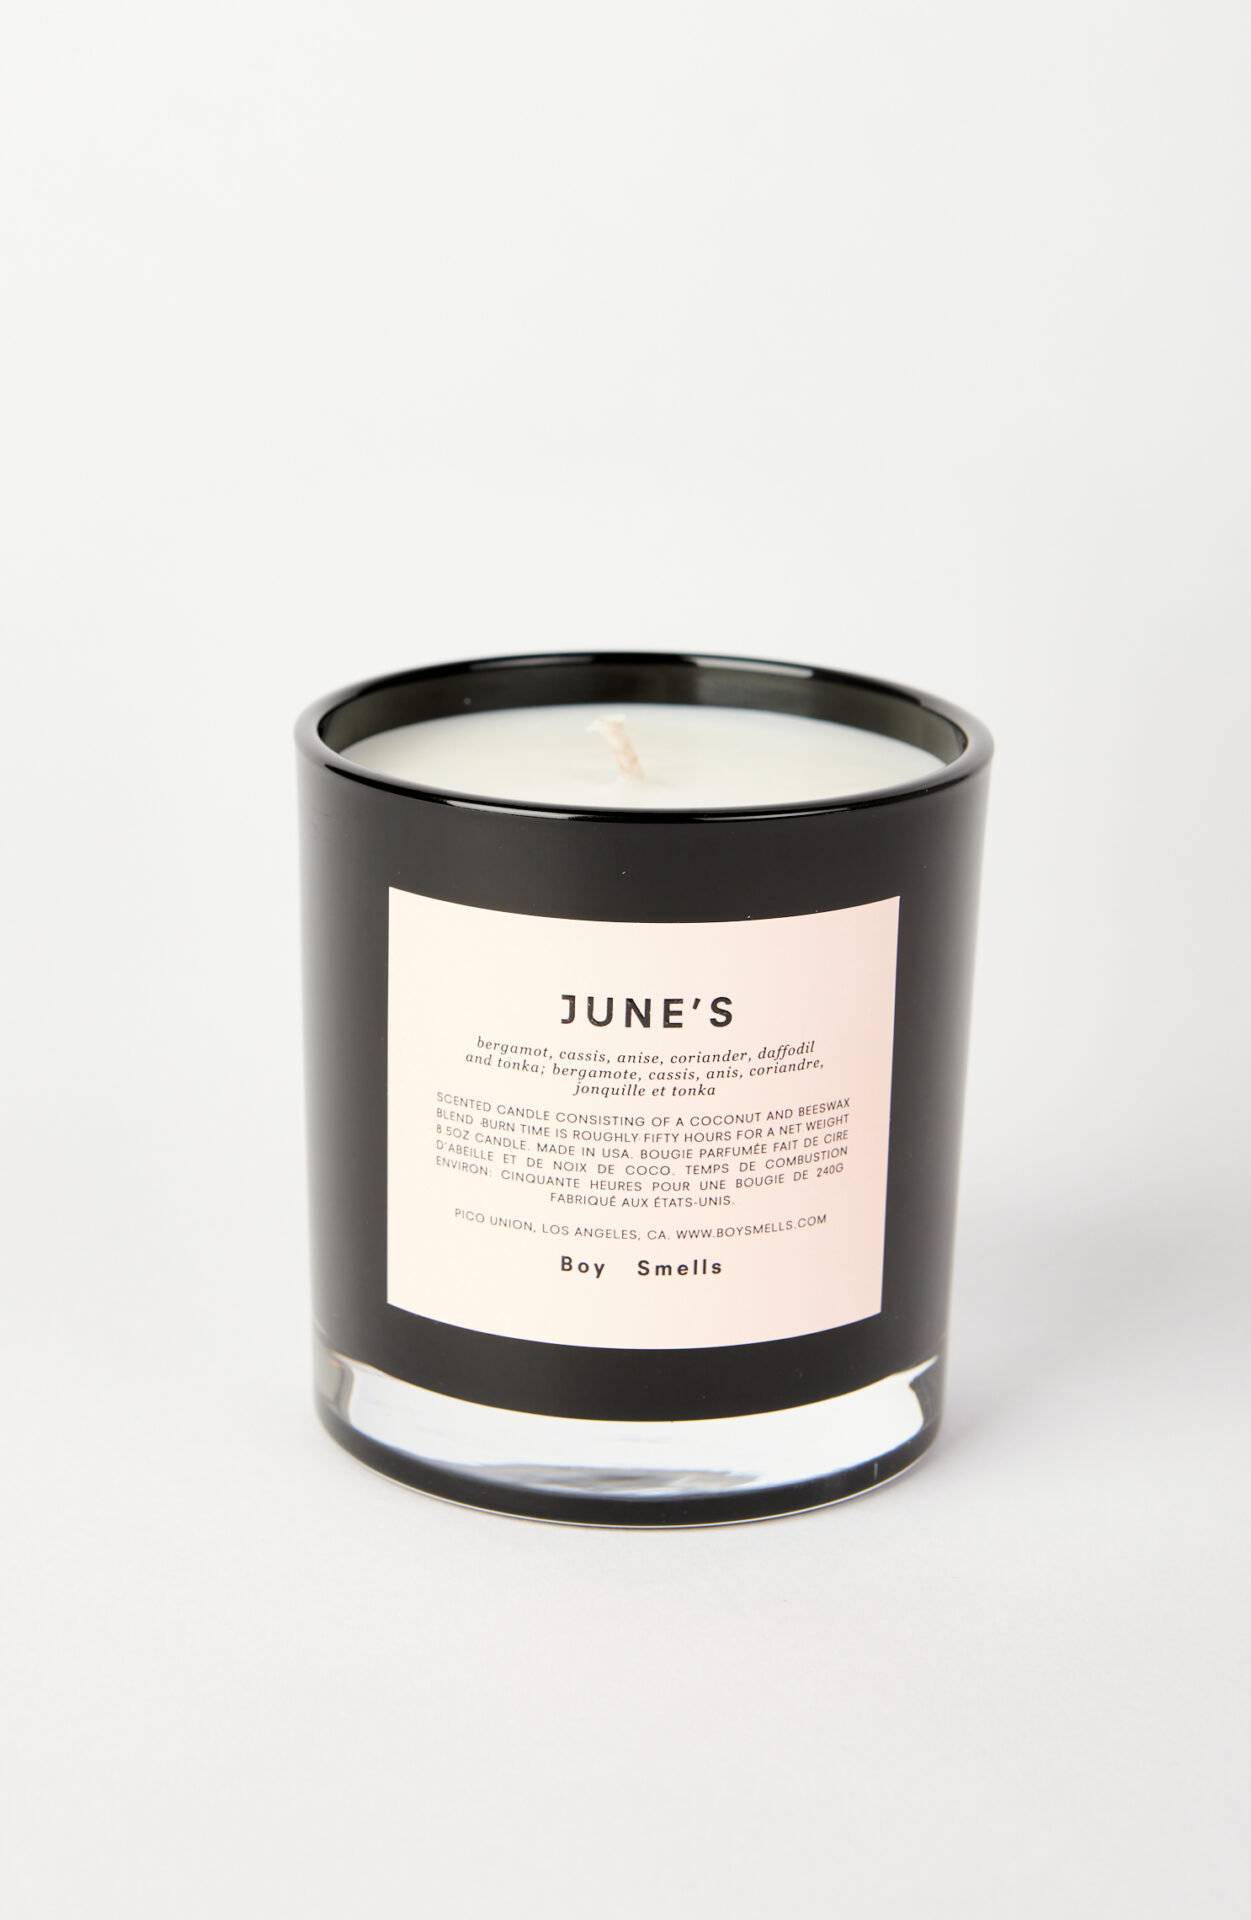 boy-smells-scented-candle-june-s-with-woody-note-schwittenberg